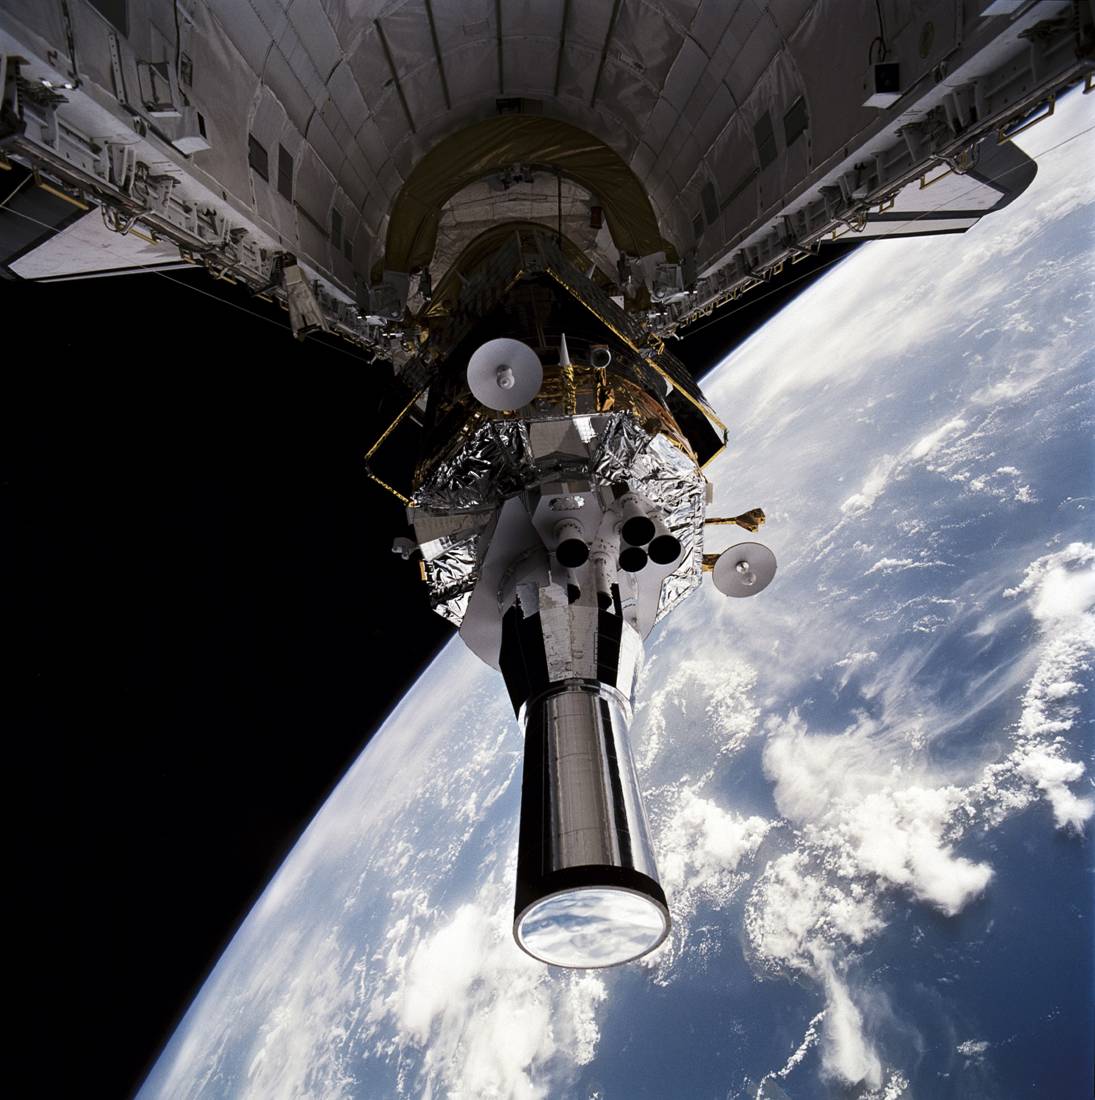 The Defense Support Program (DSP) satellite, attached to is Boeing-built Inertial Upper Stage (IUS) booster, is deployed from Atlantis' payload bay at the beginning of the STS-44 mission. Photo Credit: NASA